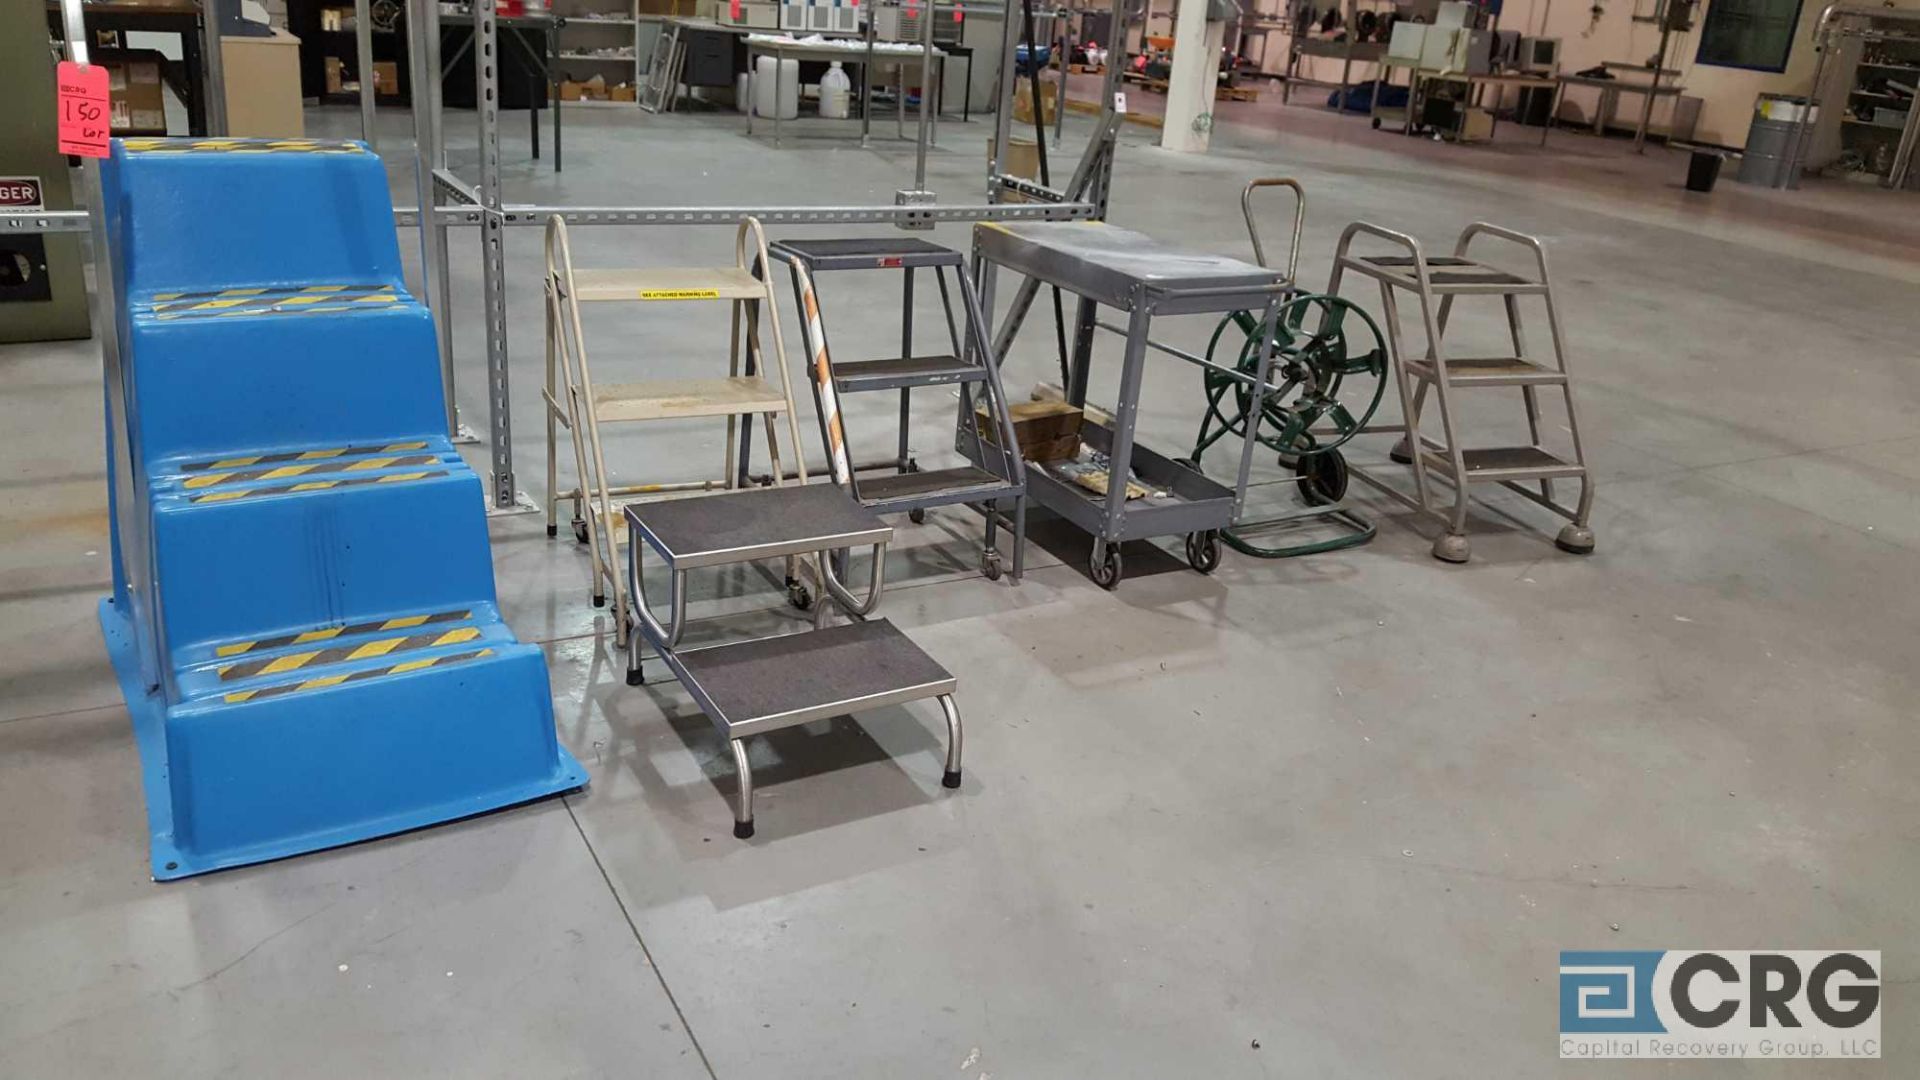 Lot of assorted portable stock ladders, cart, and hose reel.